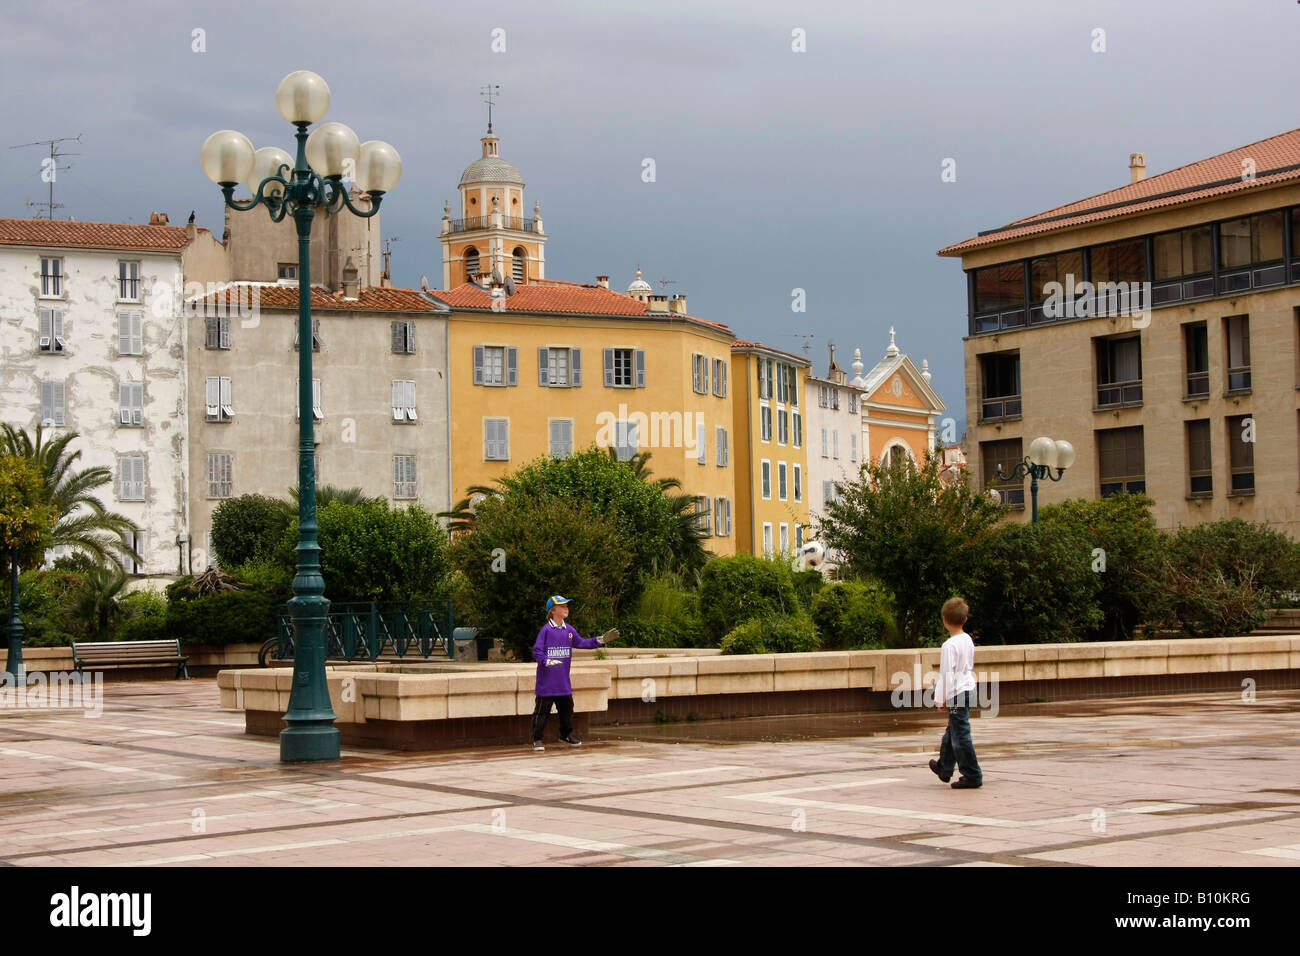 kids playing soccer on Place De Gaulle in Ajaccio Corsica France Stock Photo